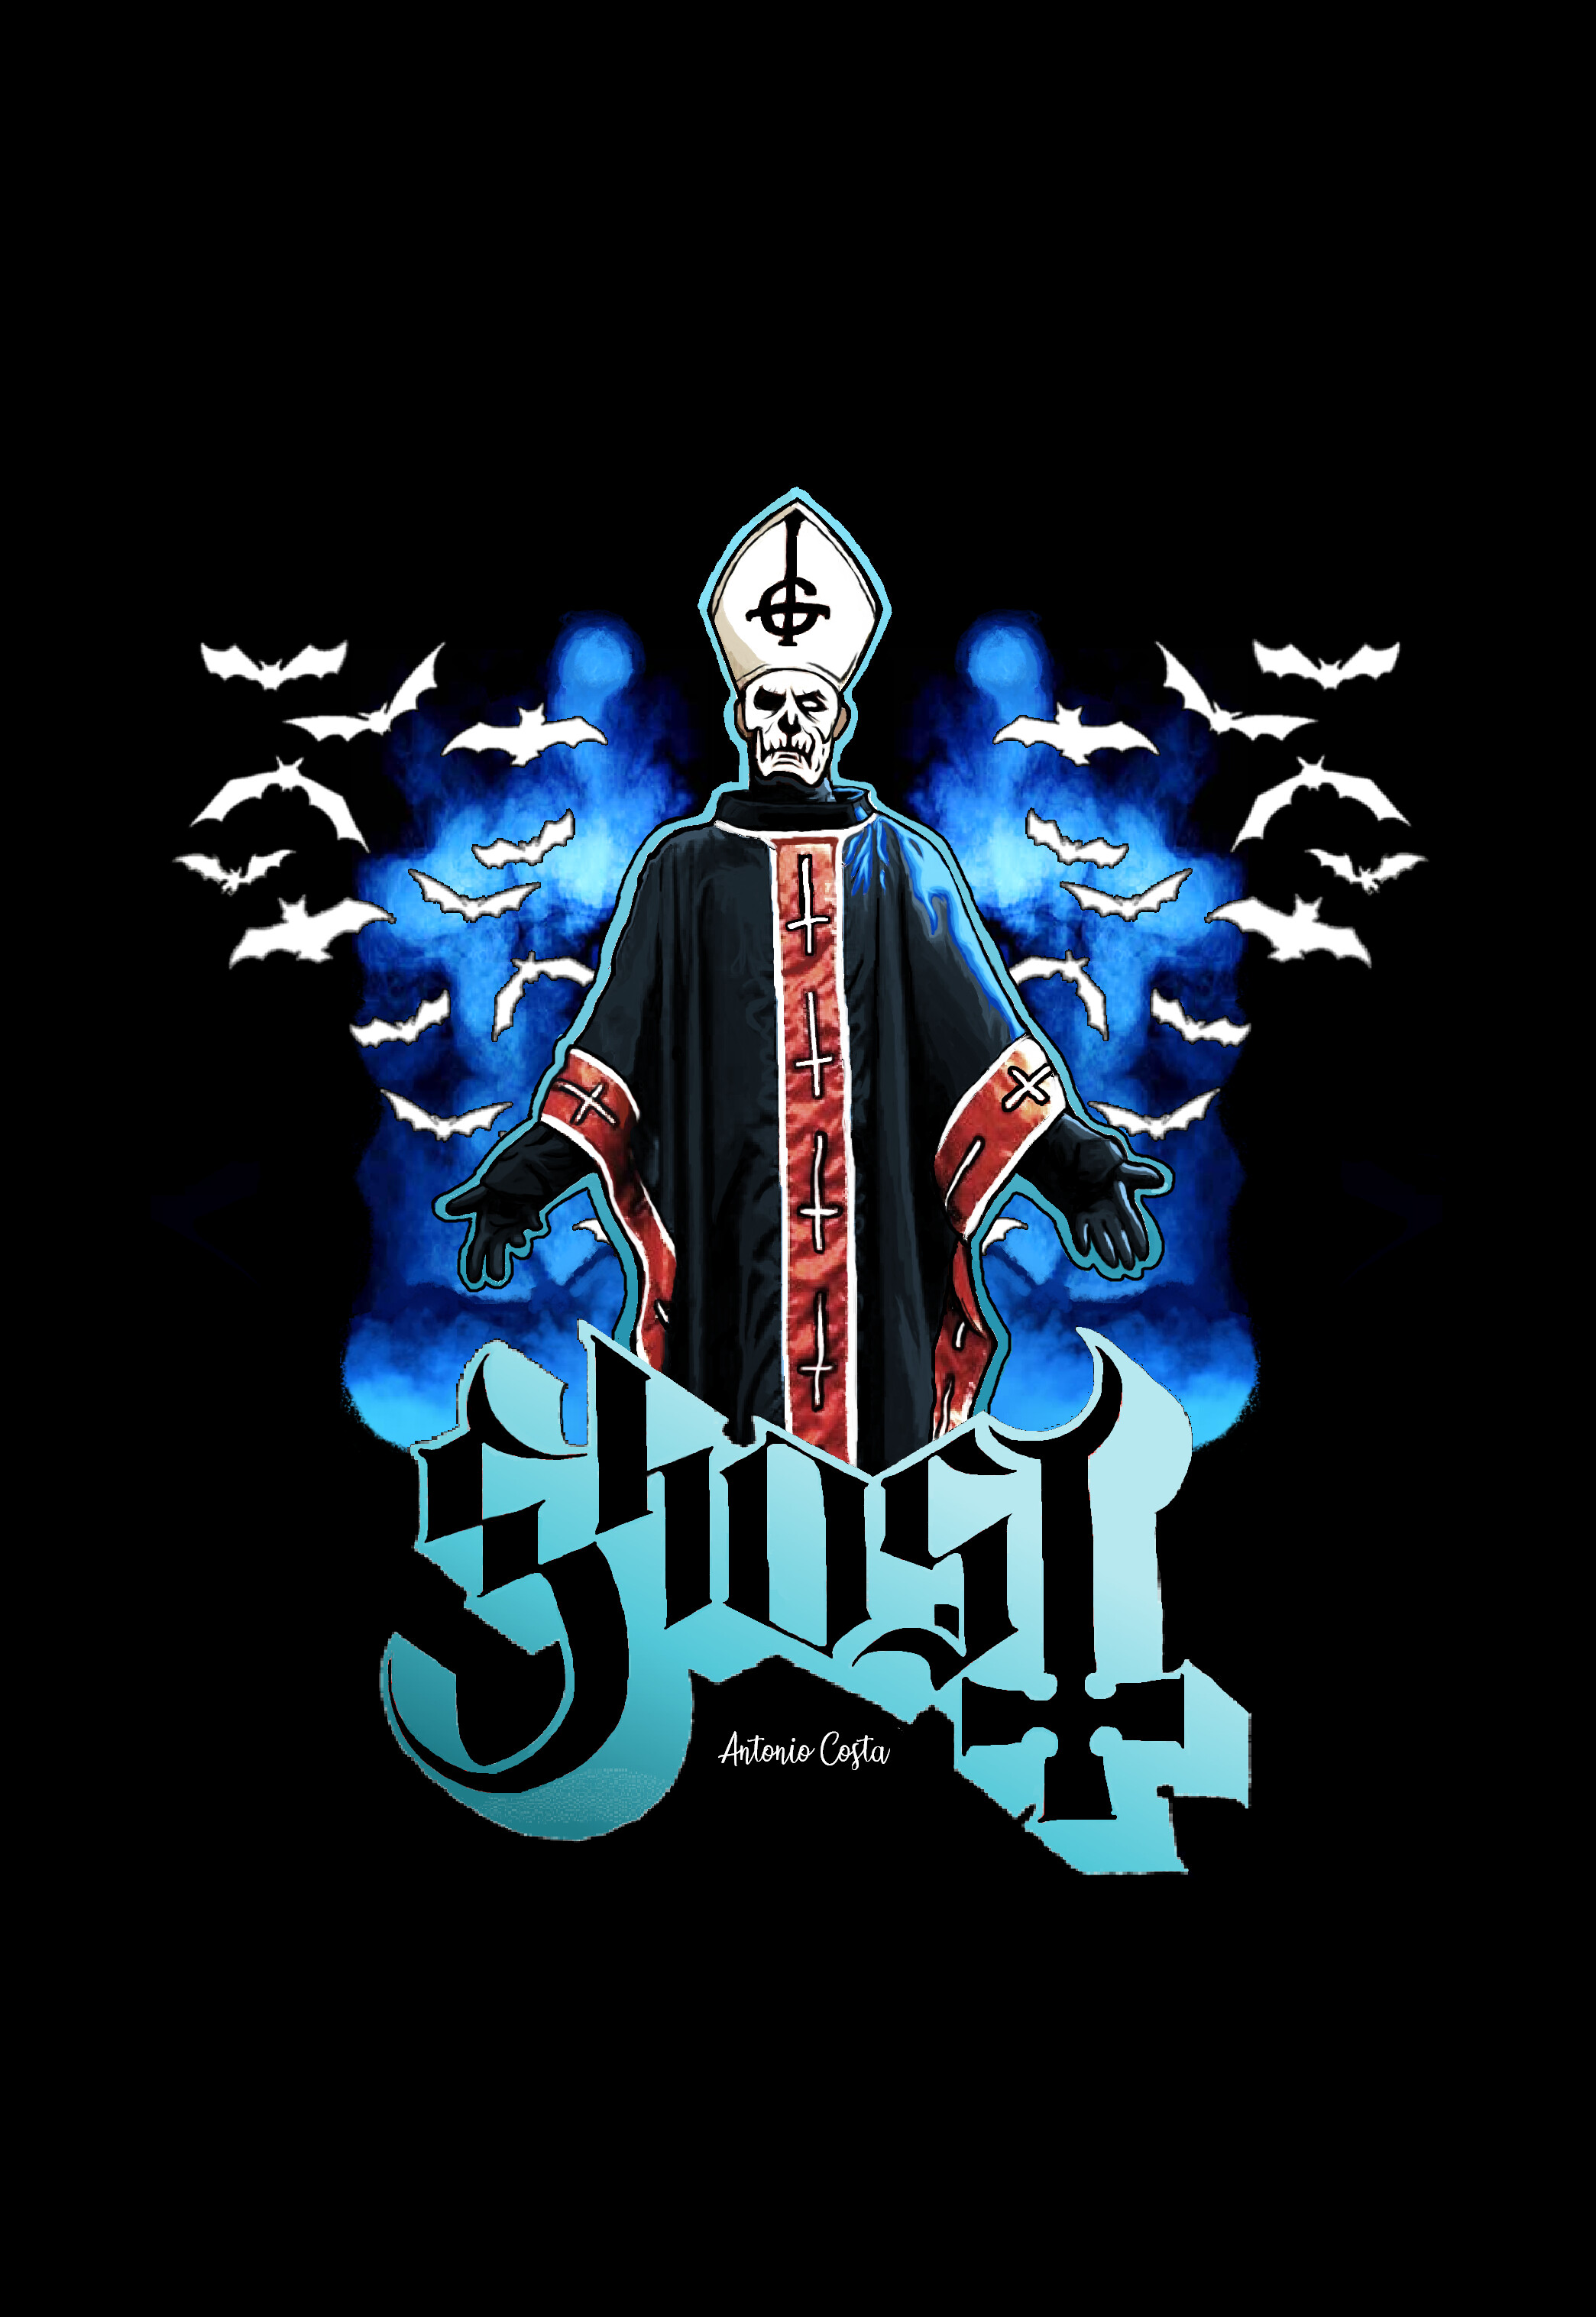 Ghost (Band): A Swedish rock band that was formed in Linkoping in 2006, Papa Emeritus. 2090x3040 HD Wallpaper.